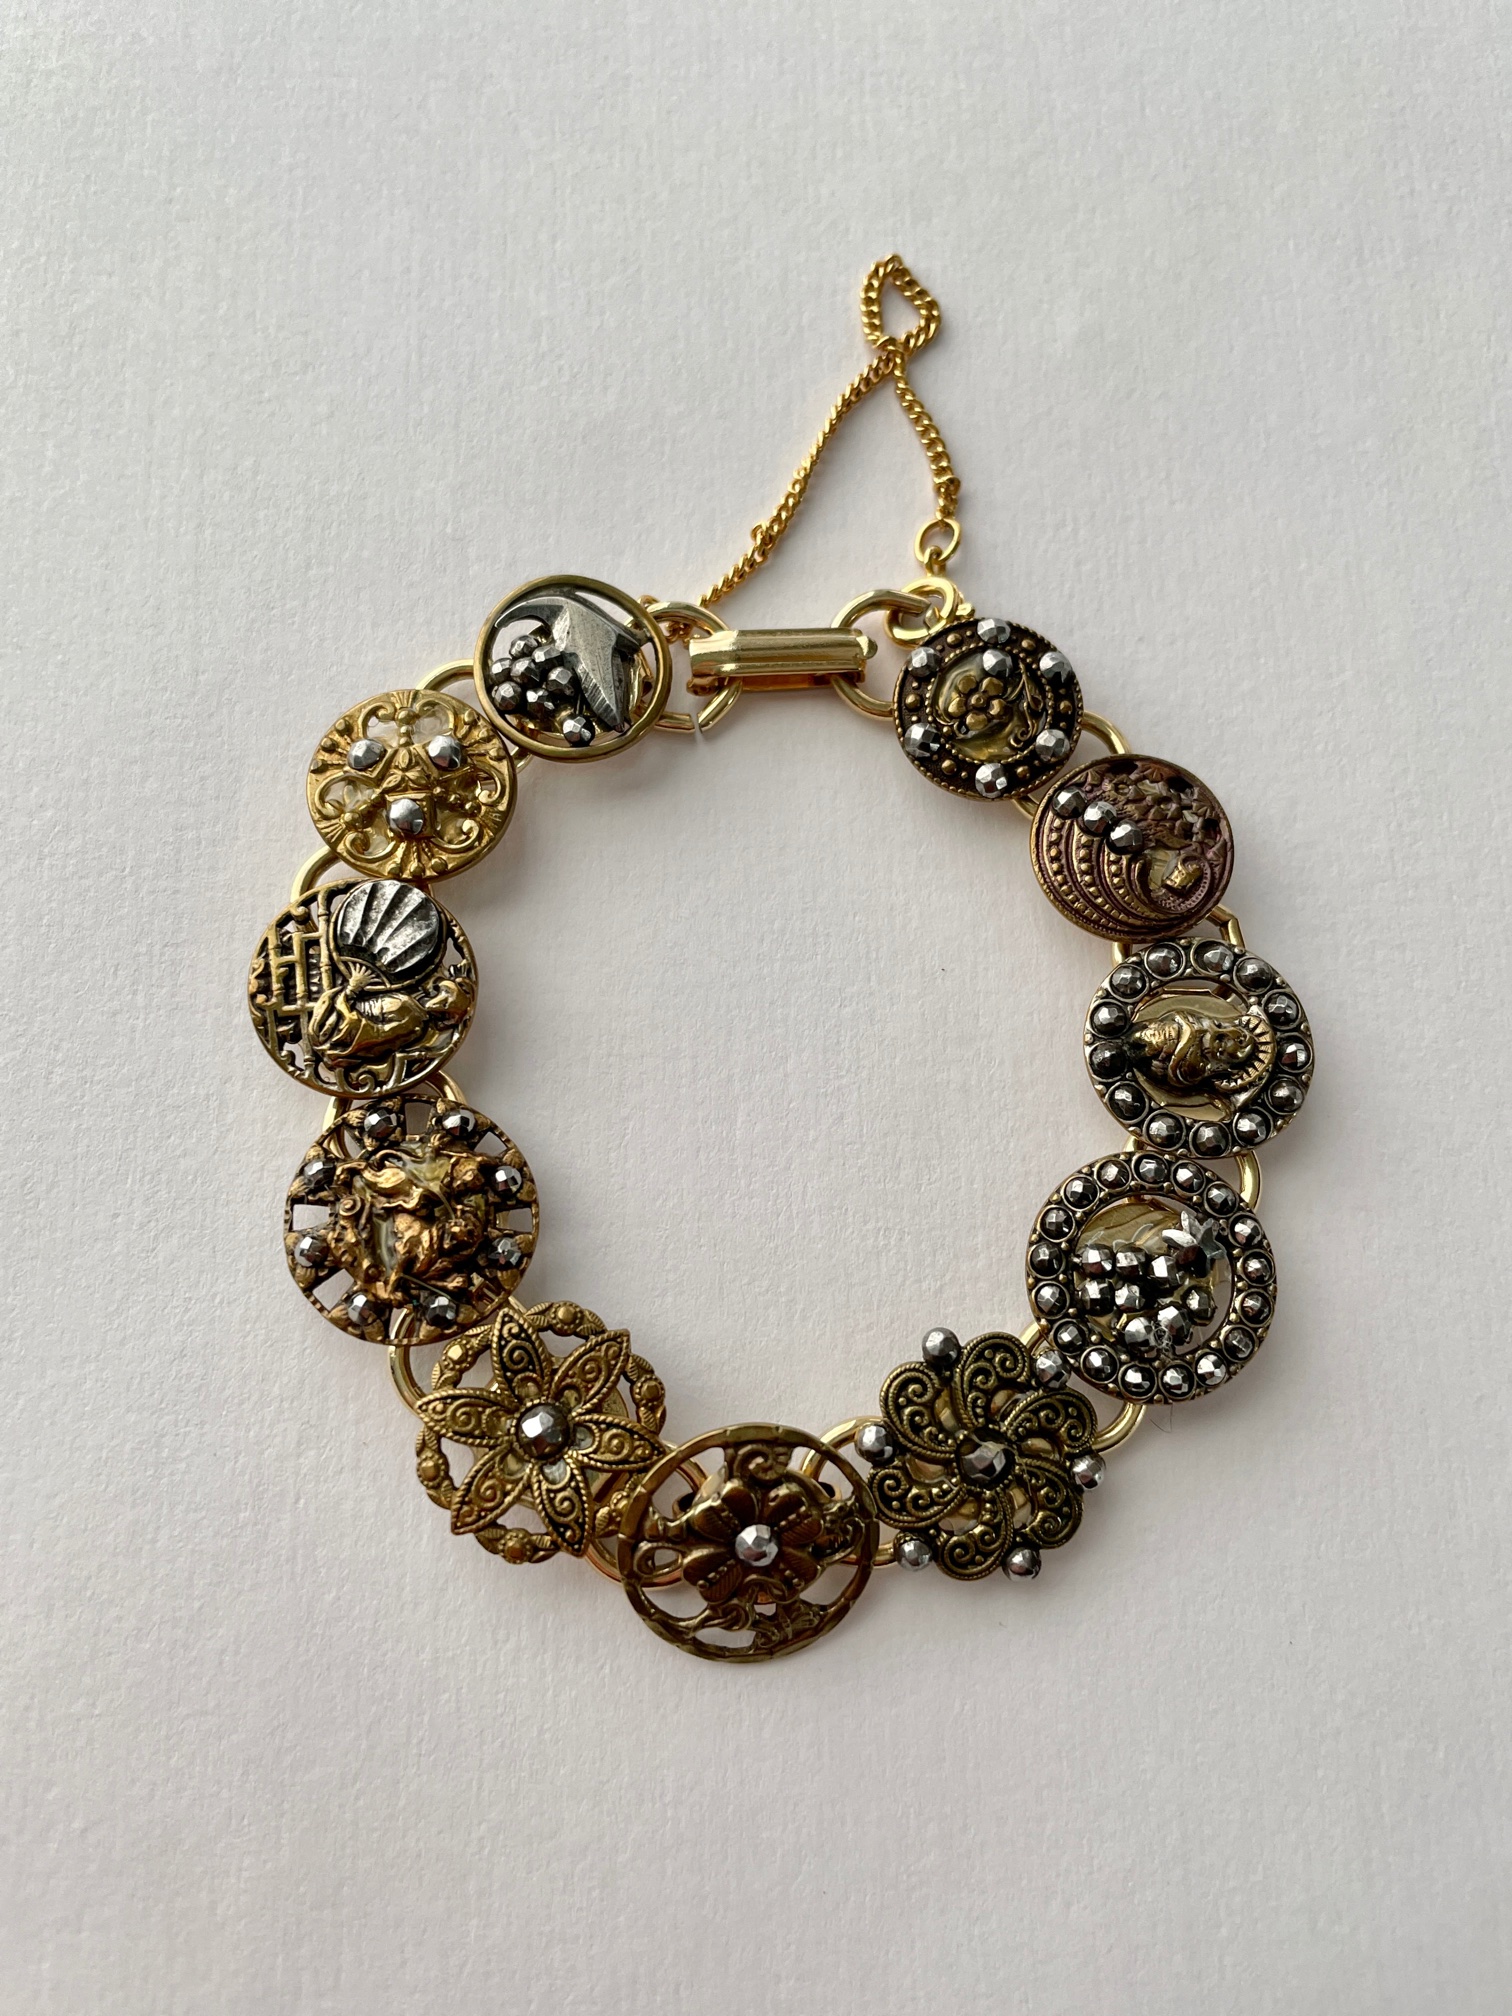 Brass and Cut Steel Buttons with Filigree and Cut-Out Designs Bracelet